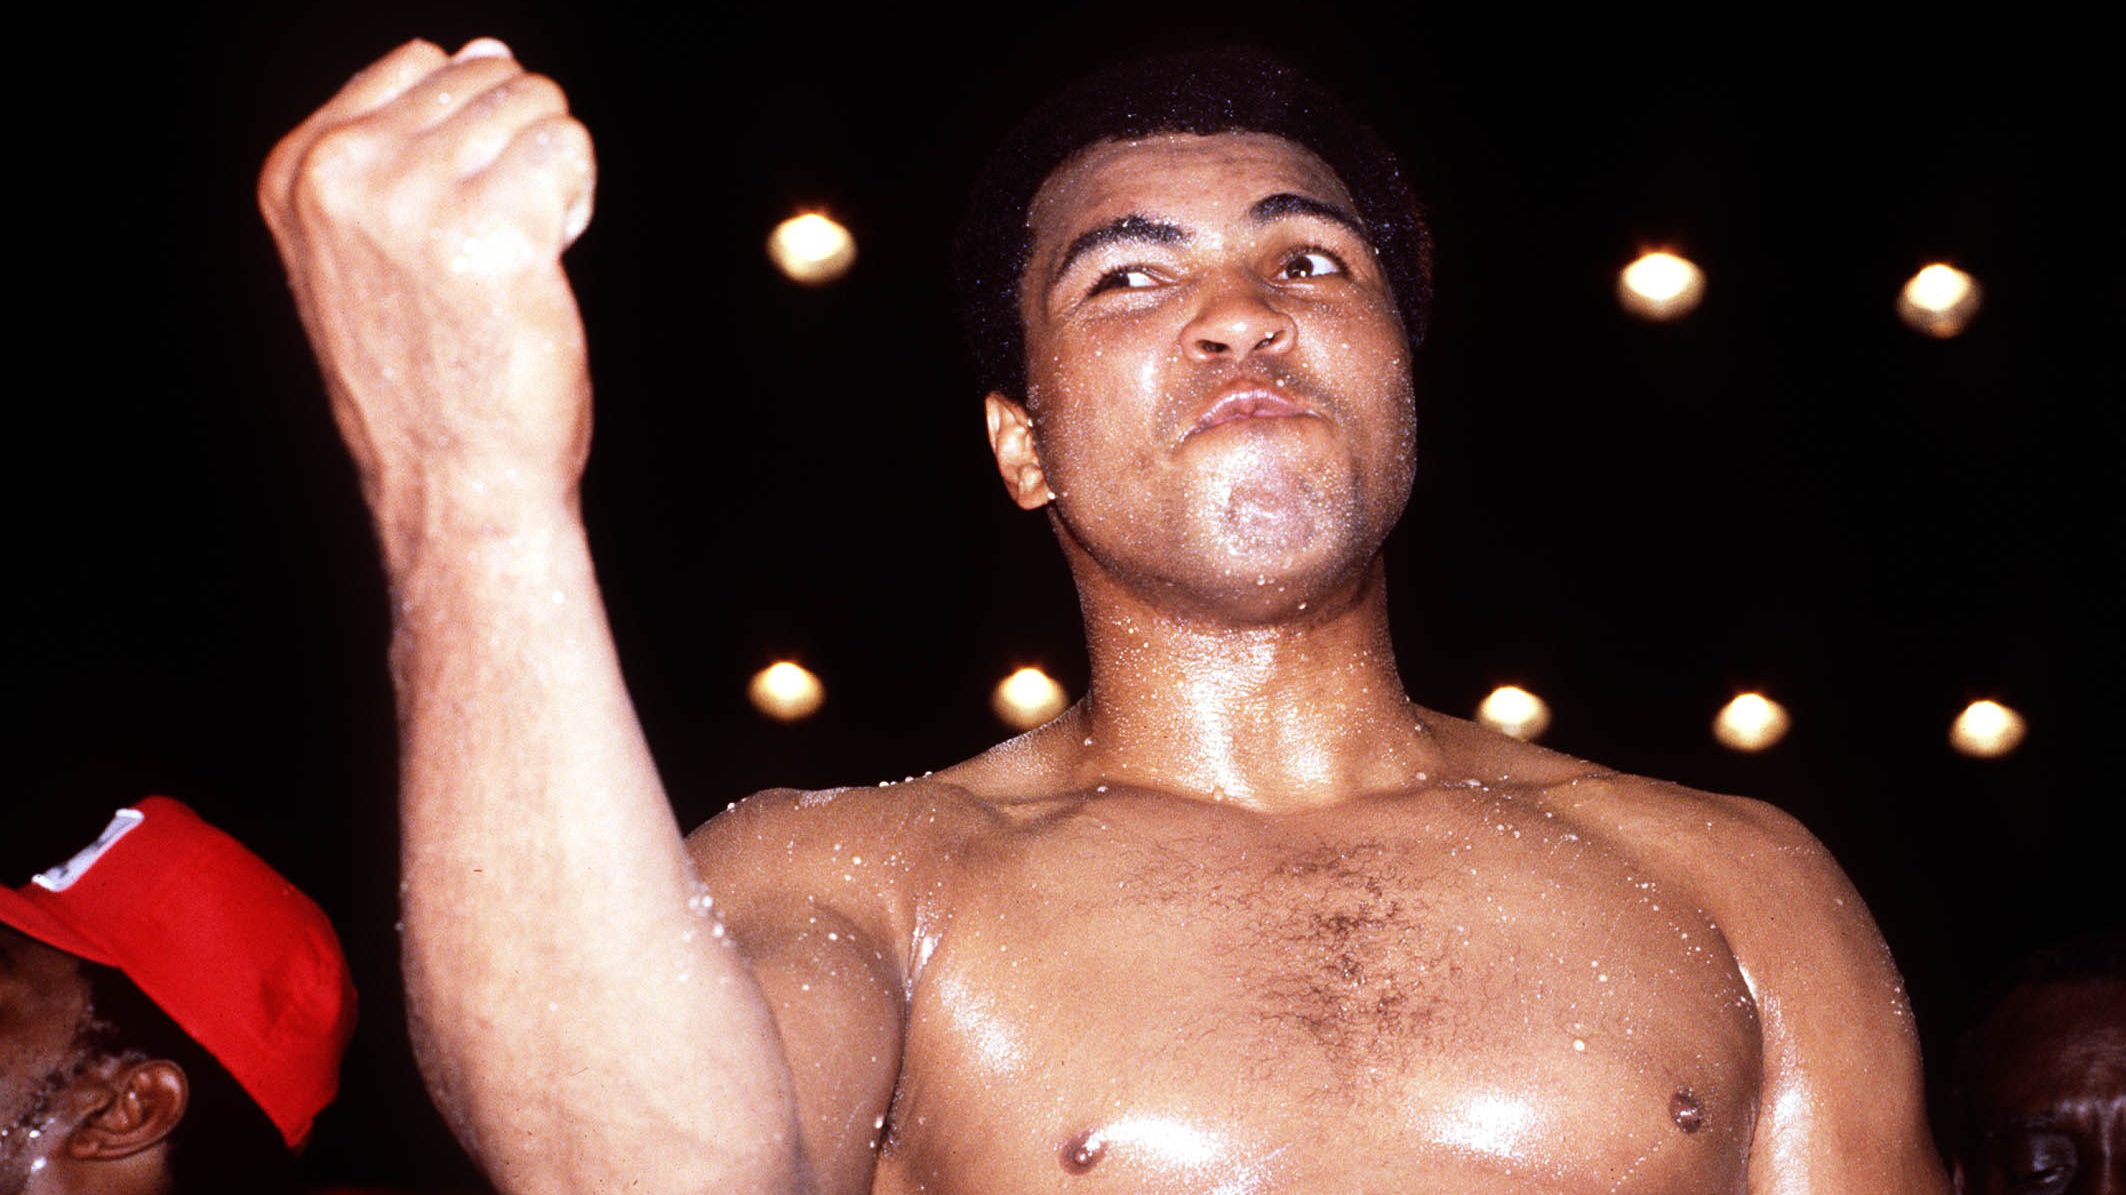 Muhammad Ali during the build up to his fight versus Leon Spinks 